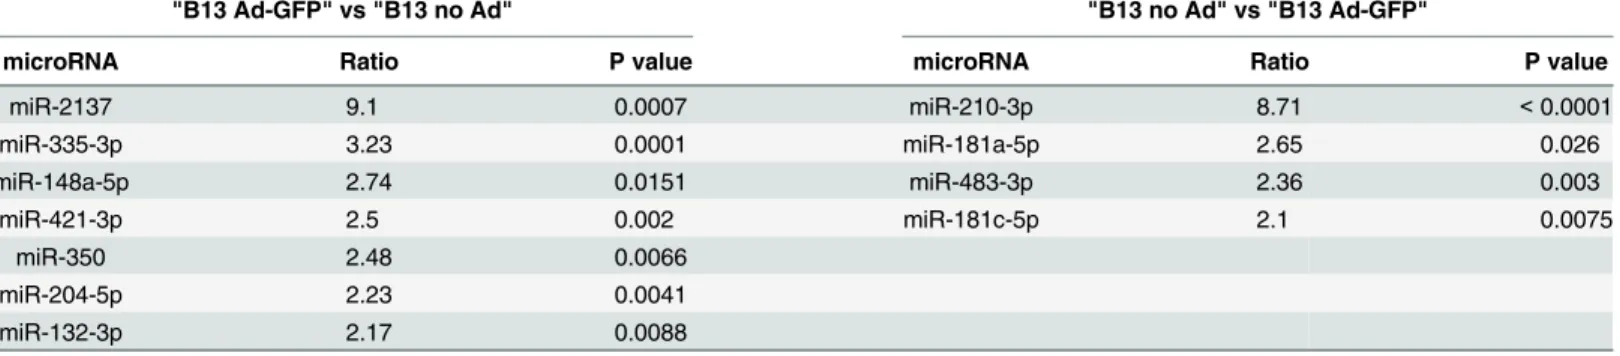 Table 2. Differentially expressed miRNAs comparing B13 cells transduced with Ad-GFP to not transduced B13 cells